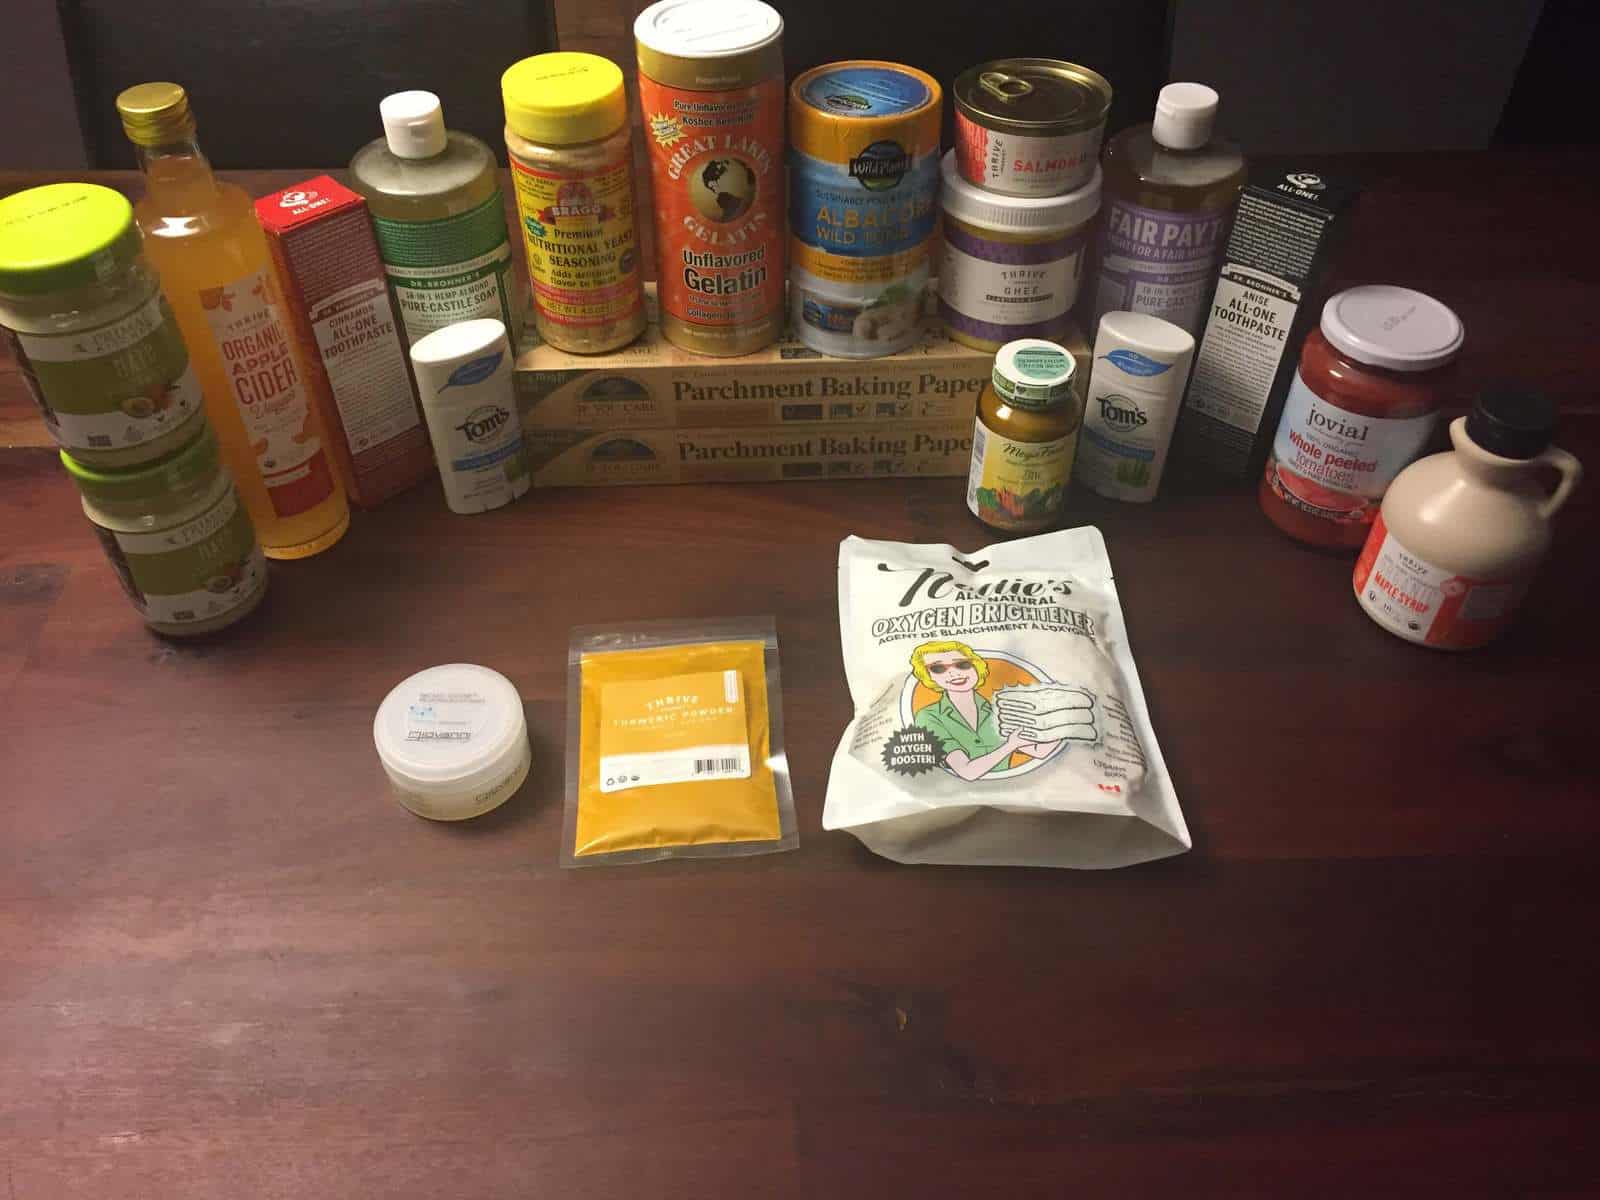 Products from Thrive Market